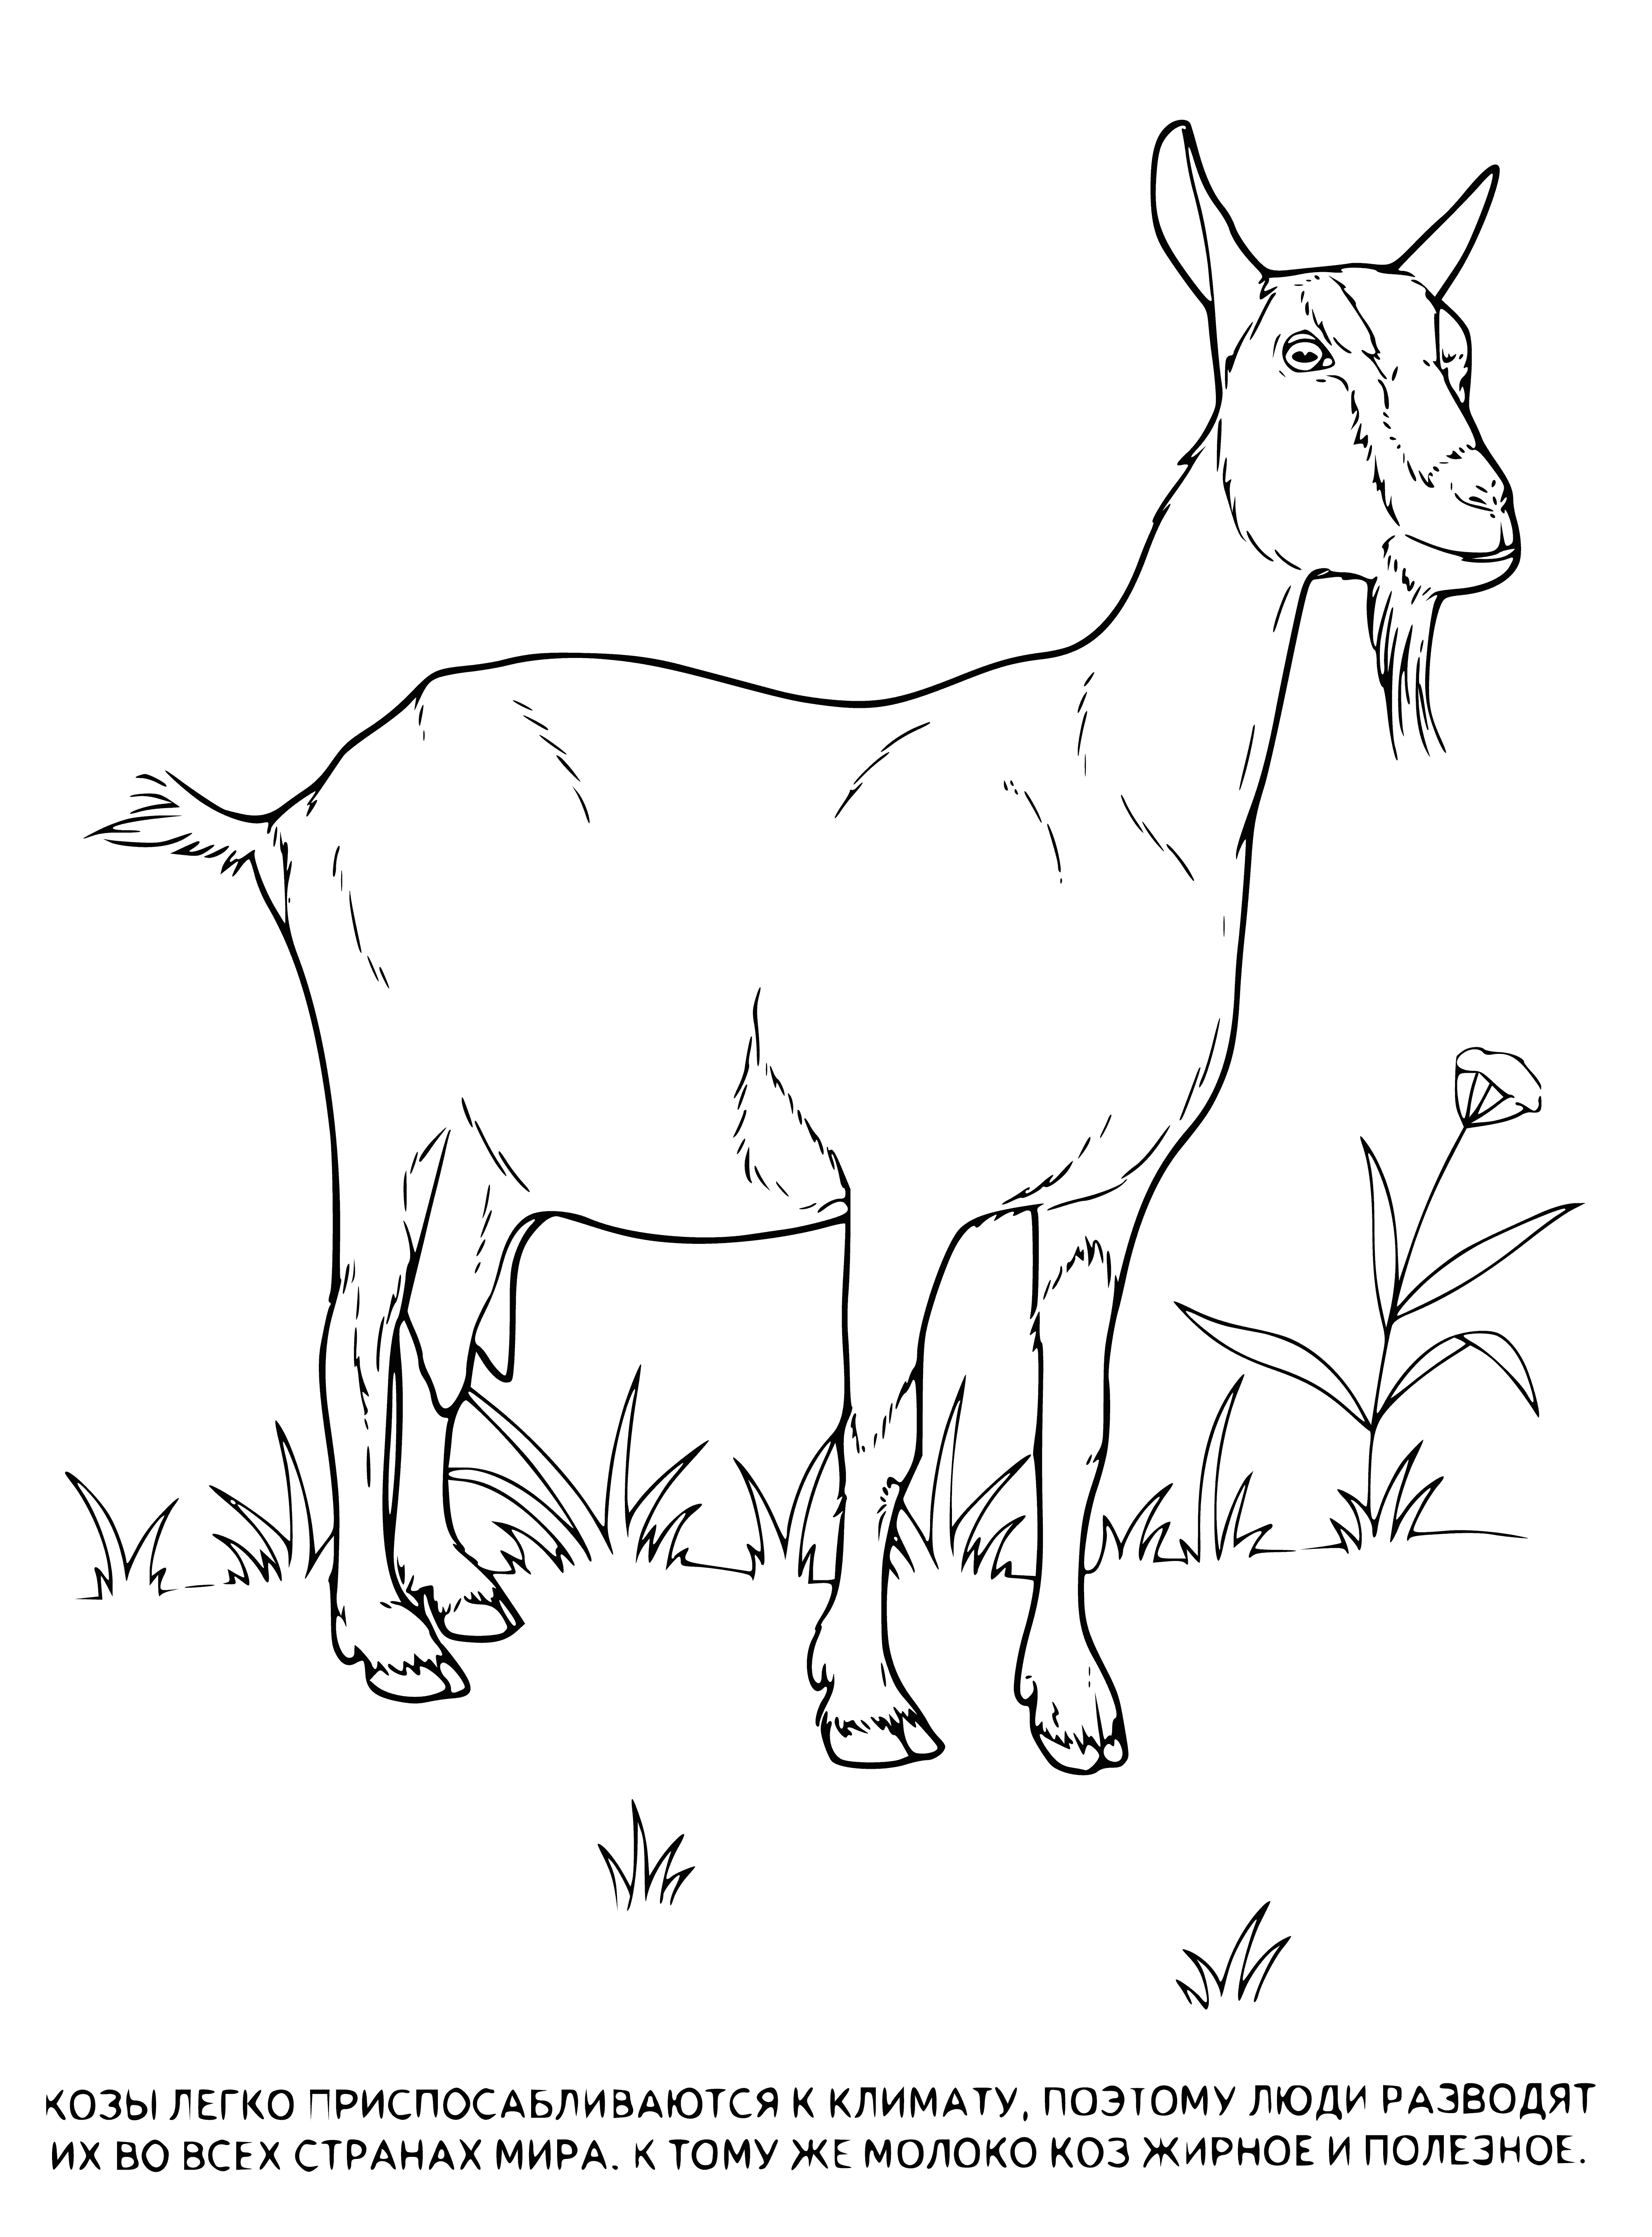 coloring page: Goat eating grass on a hill- mostly white, black spots, long pointy ears & short curly tail.